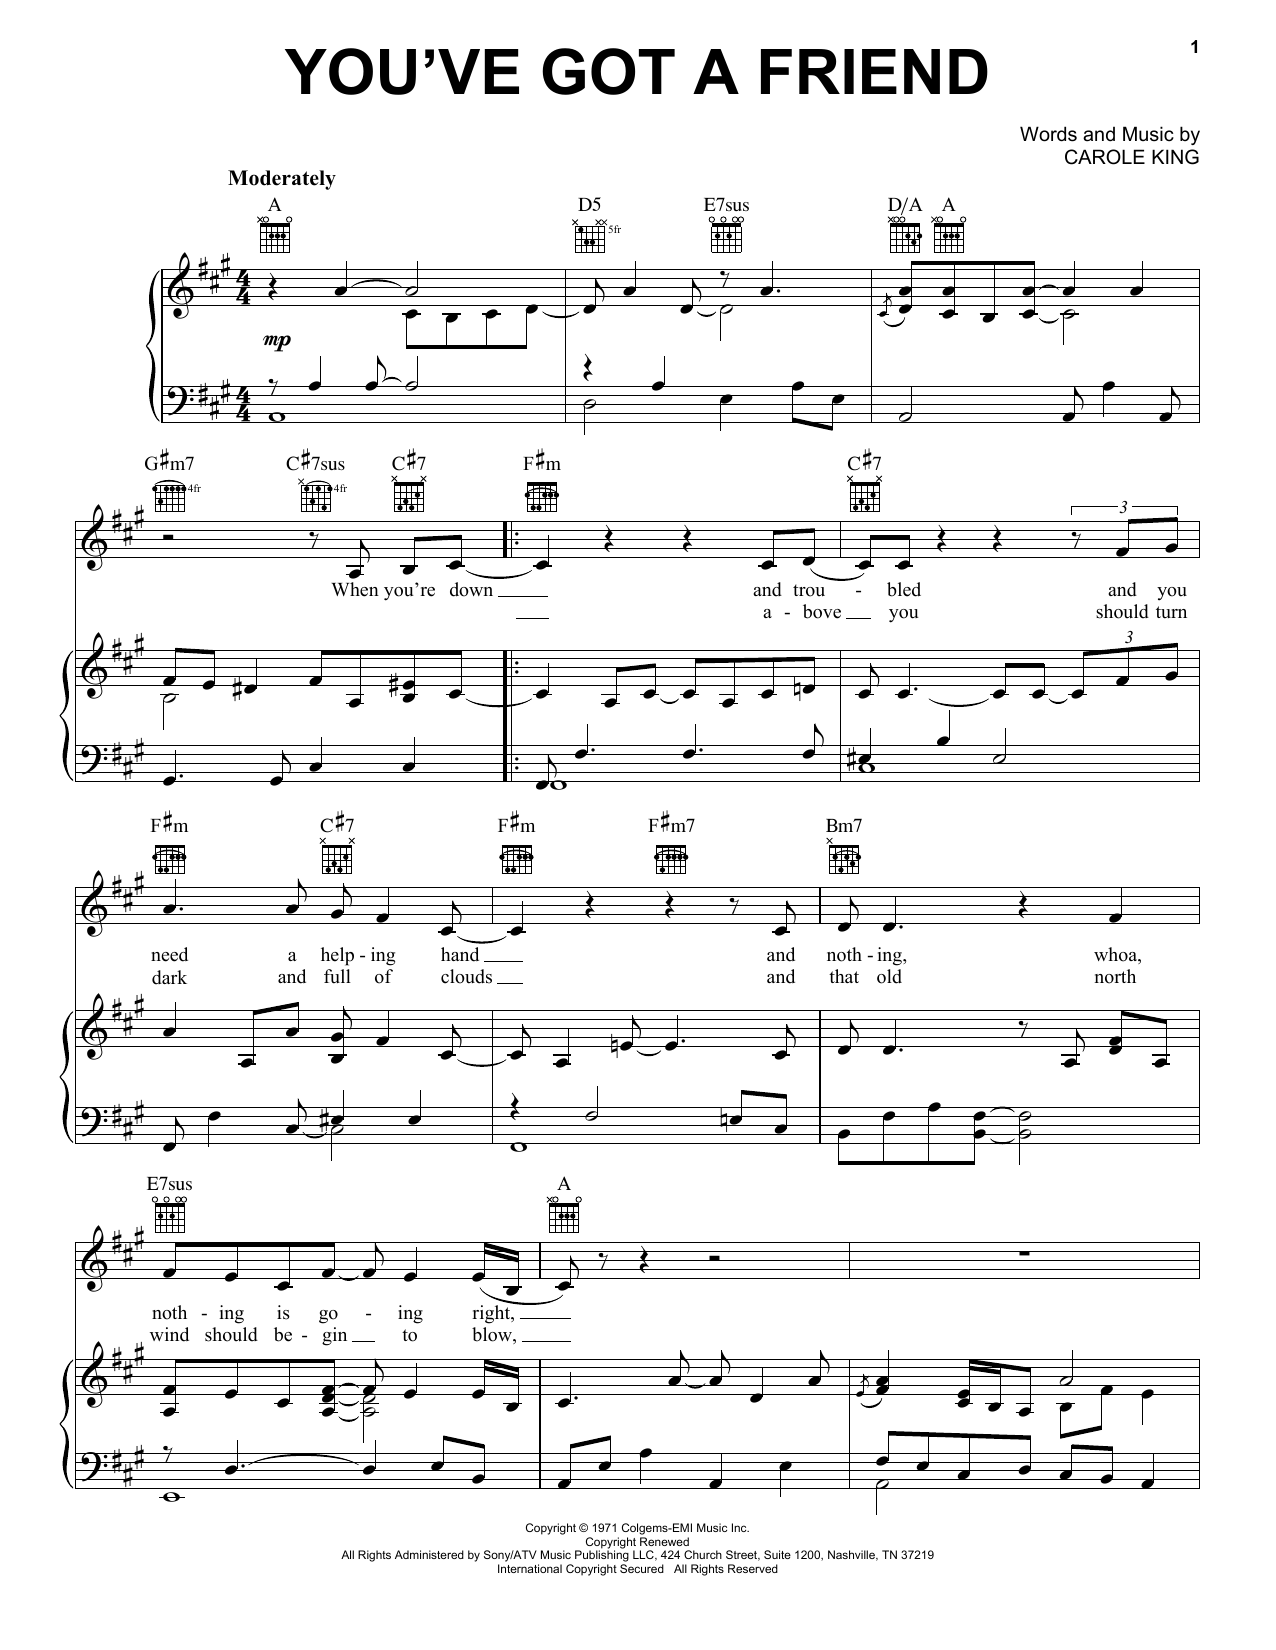 Carole King You Ve Got A Friend Sheet Music Pdf Notes Chords Pop Score Lead Sheet Fake Book Download Printable Sku 251475 The two versions were recorded simultaneously in 1971 with shared musicians. carole king you ve got a friend sheet music notes chords download printable lead sheet fake book pdf score sku 251475